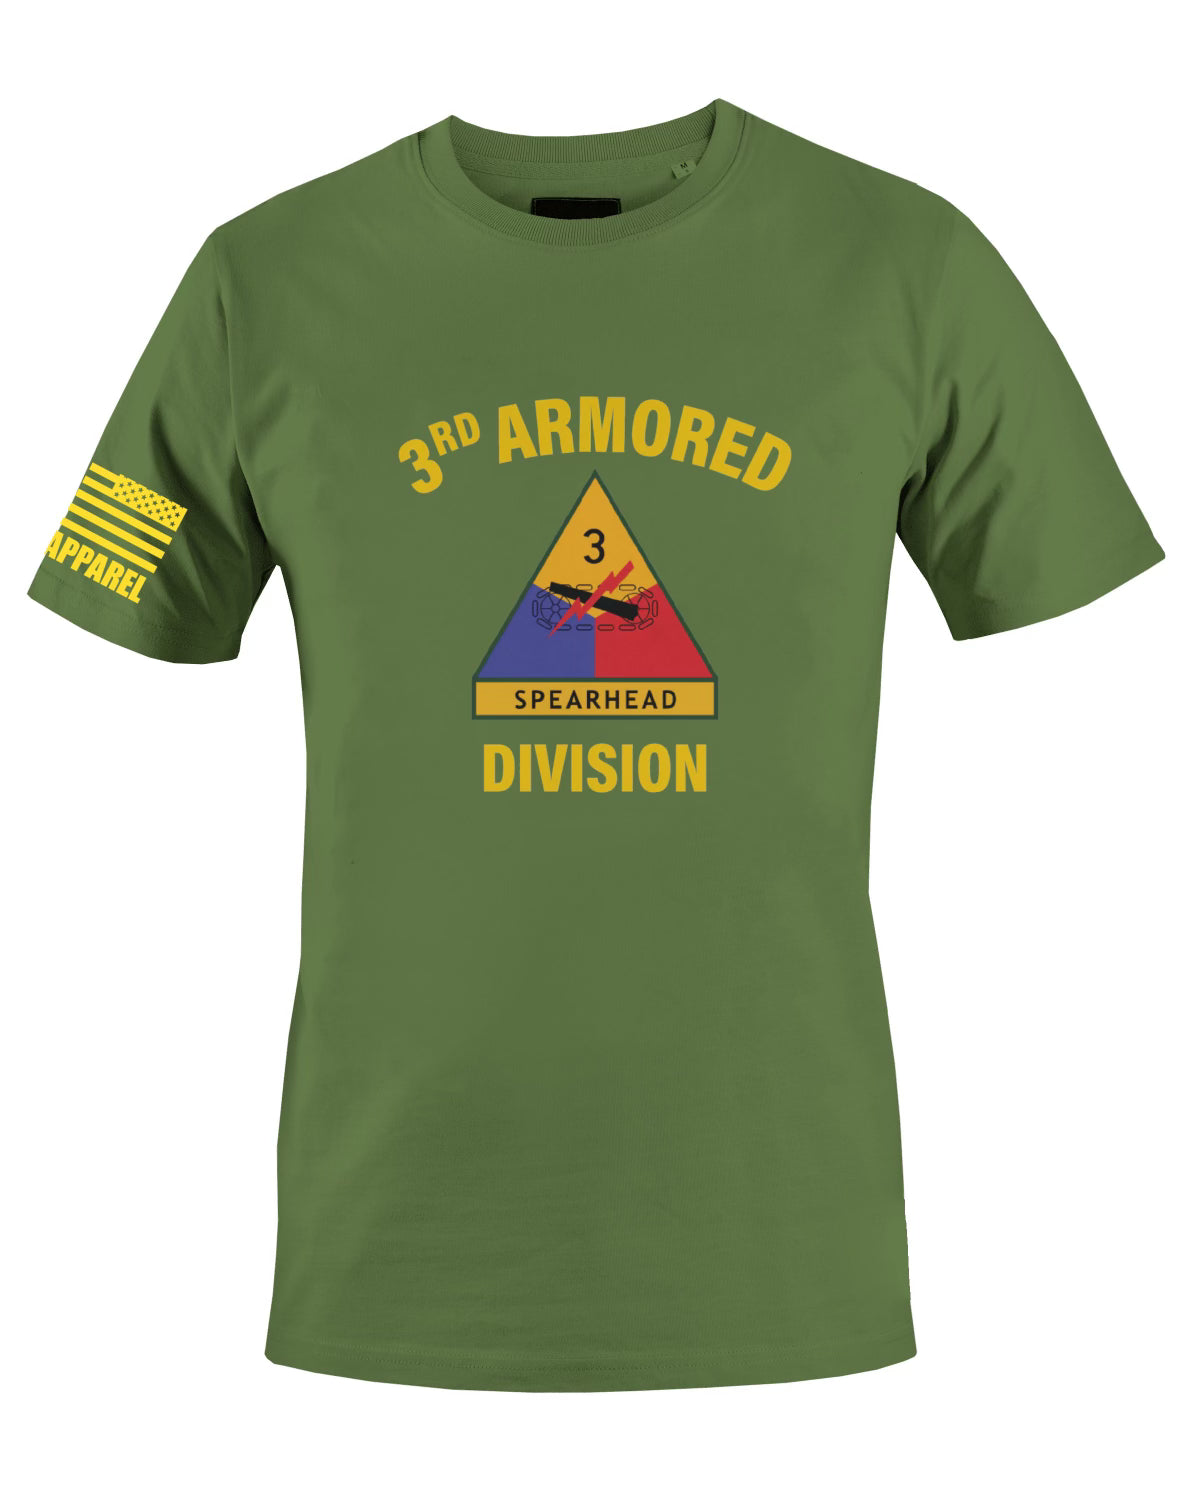 3rd ARMORED DIV-SPEARHEAD